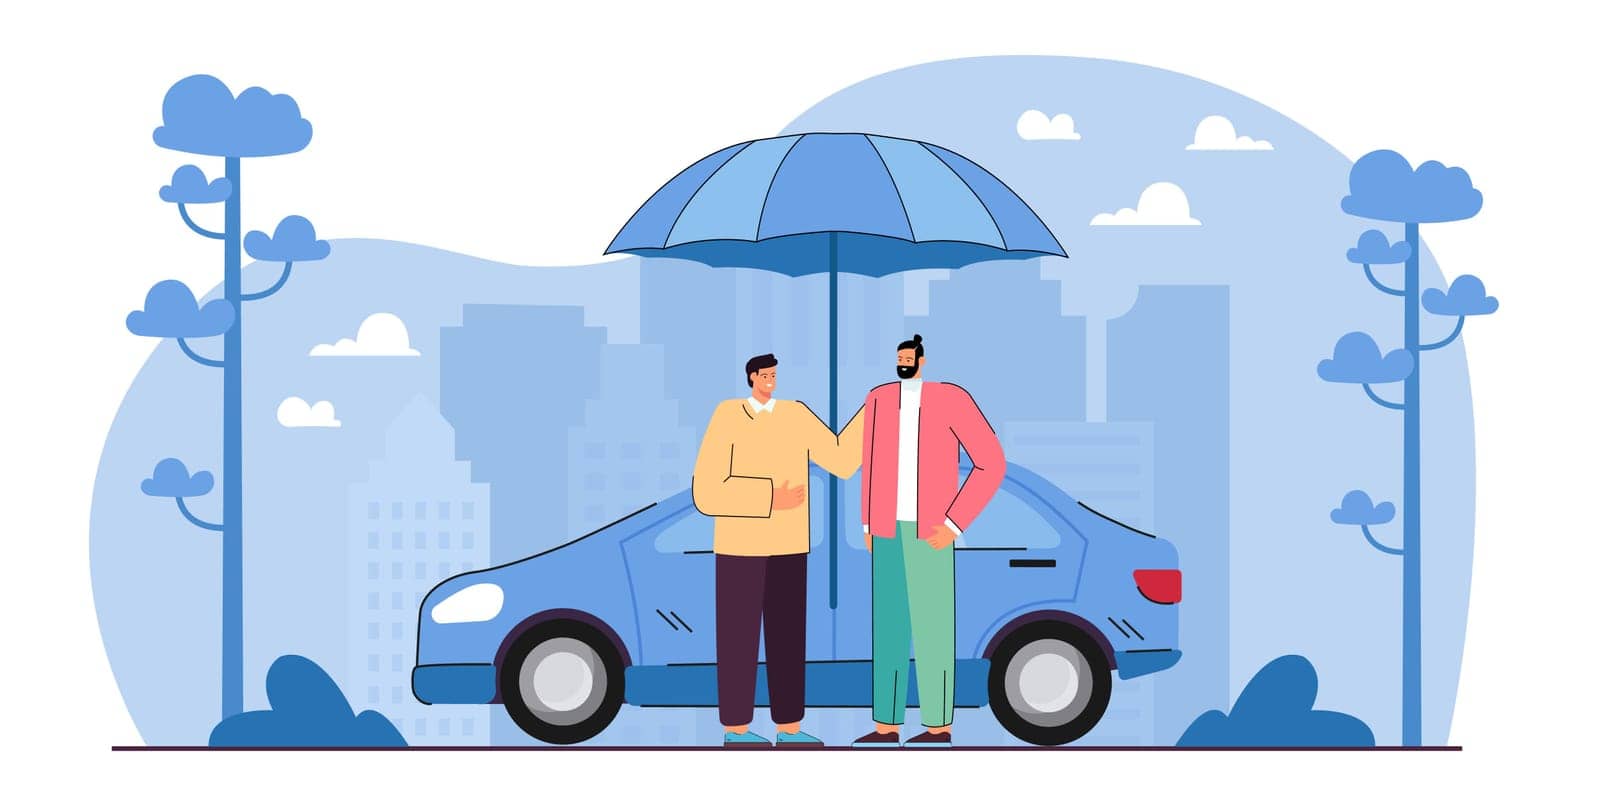 Cartoon auto driver and safety worker standing on car under umbrella background. Rental car insurance flat vector illustration. Security policy, assurance assistance concept